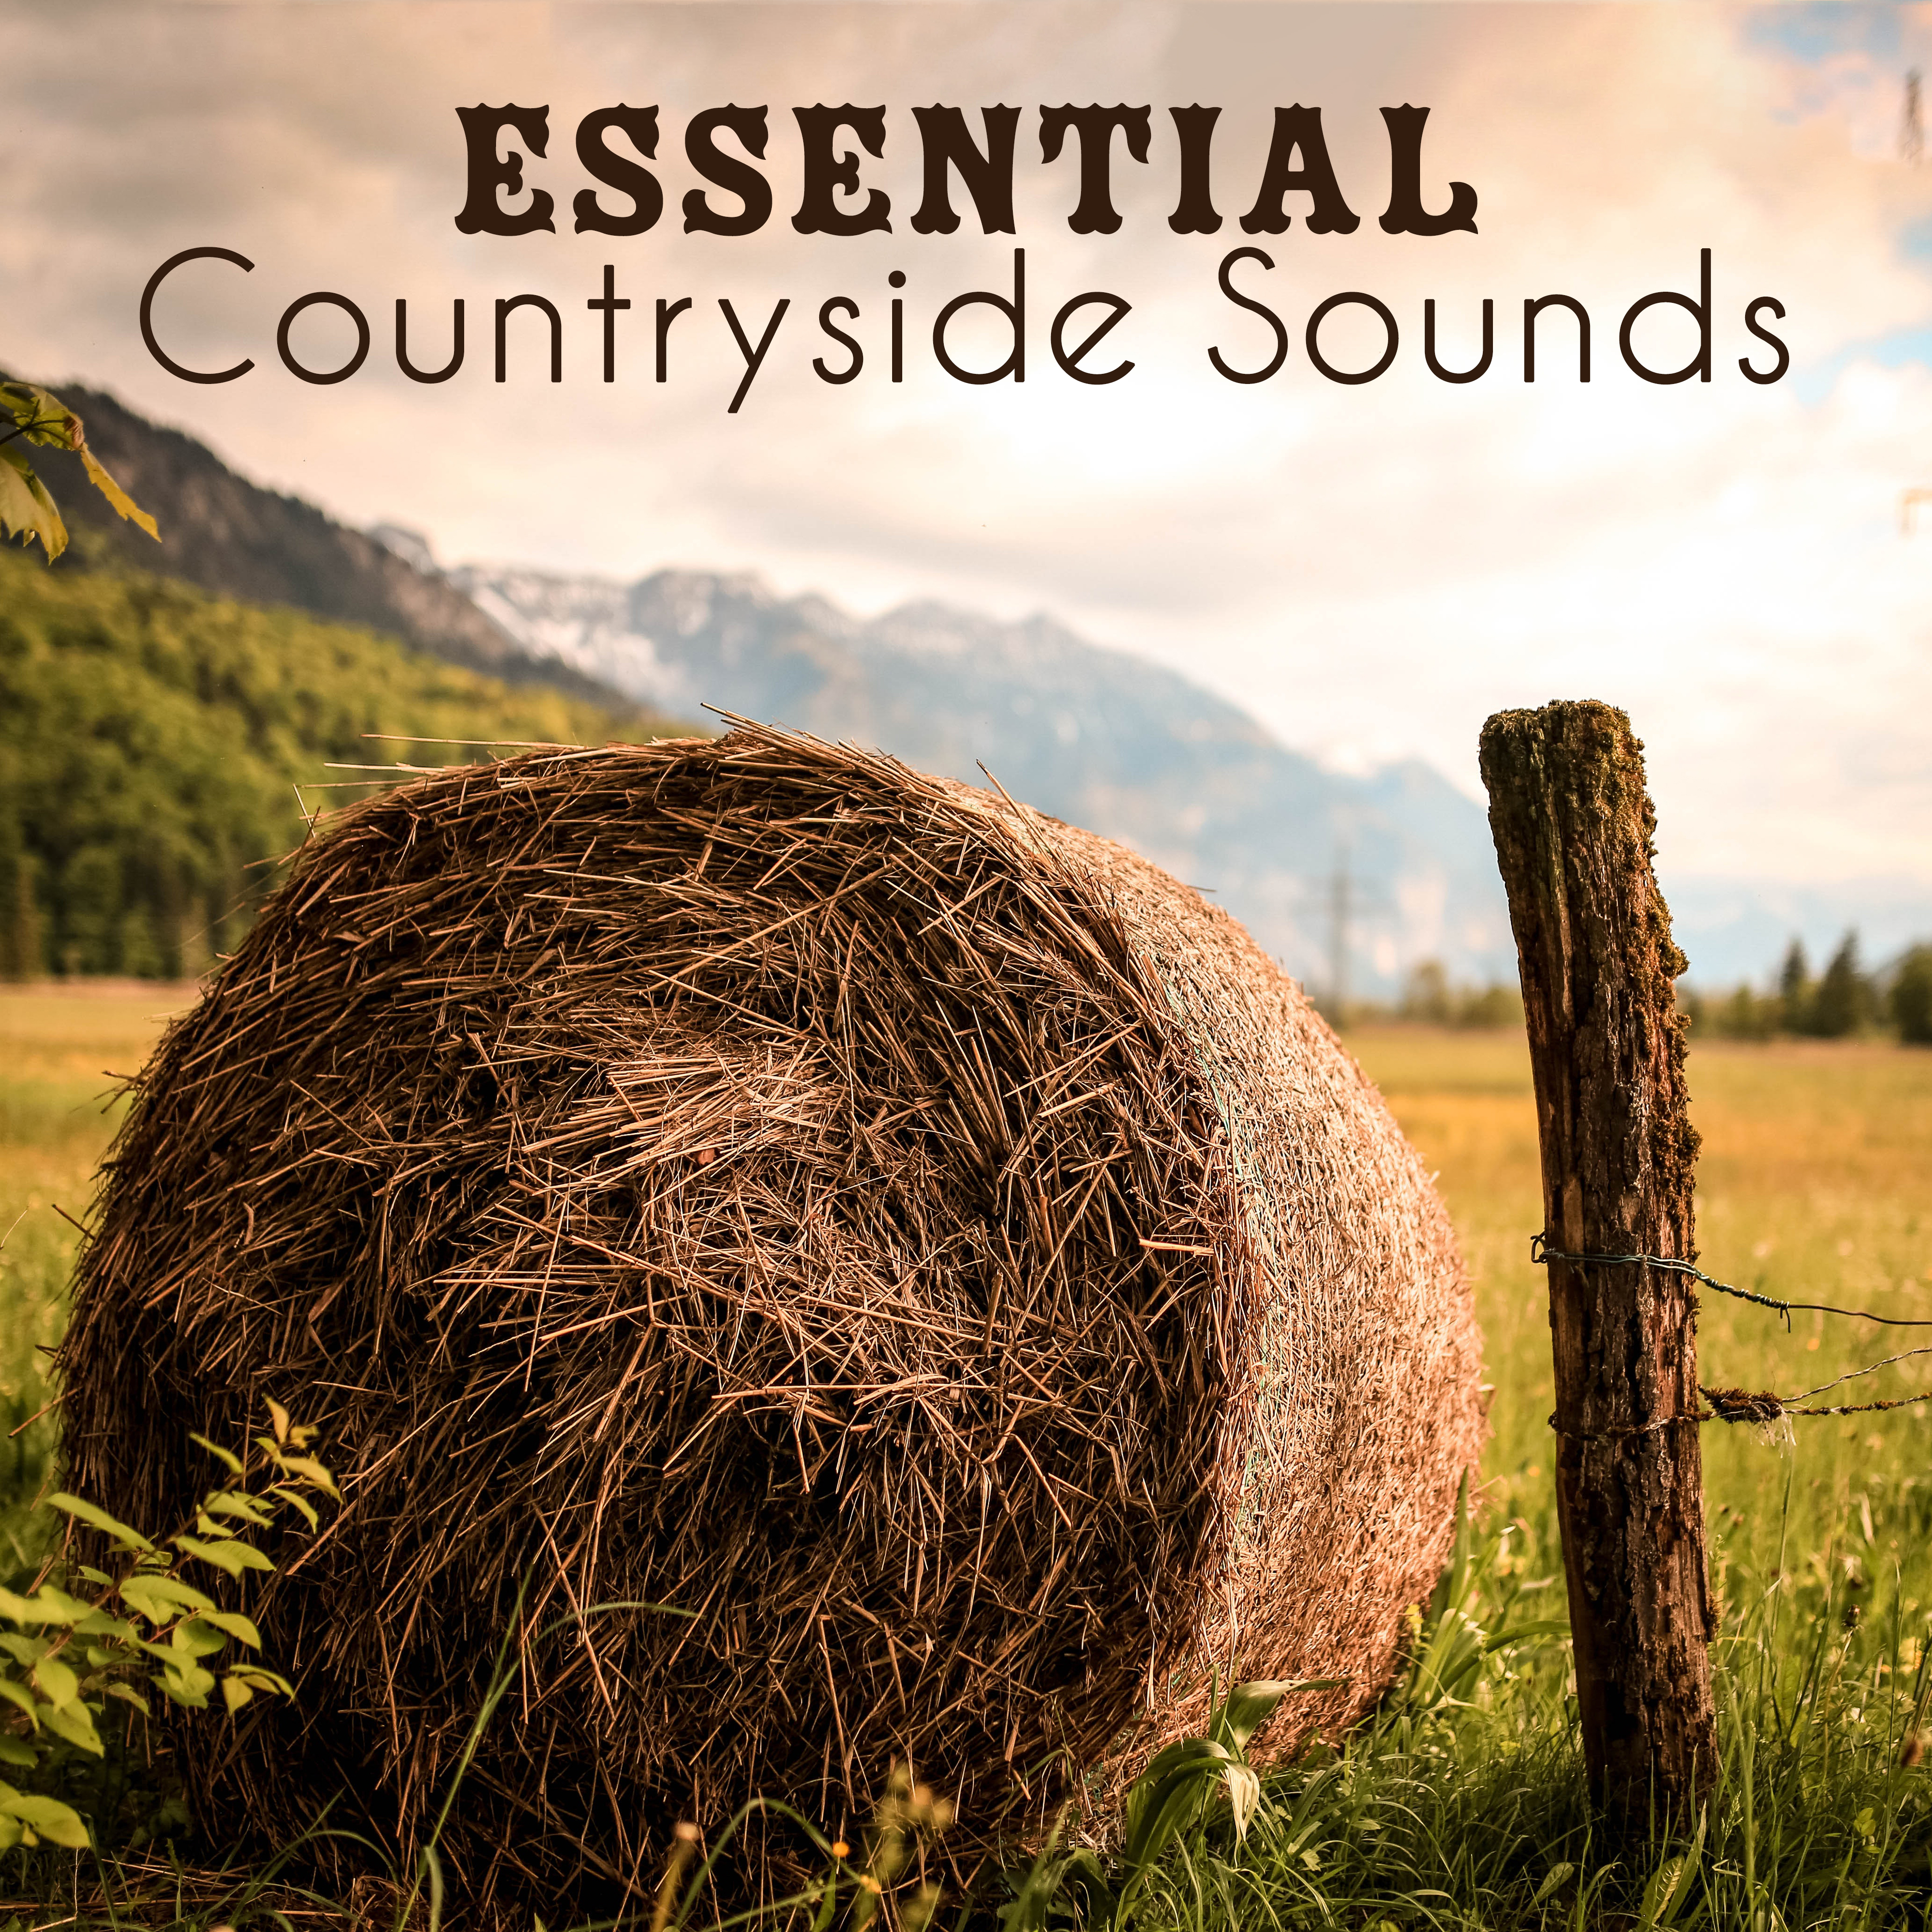 Essential Countryside Sounds